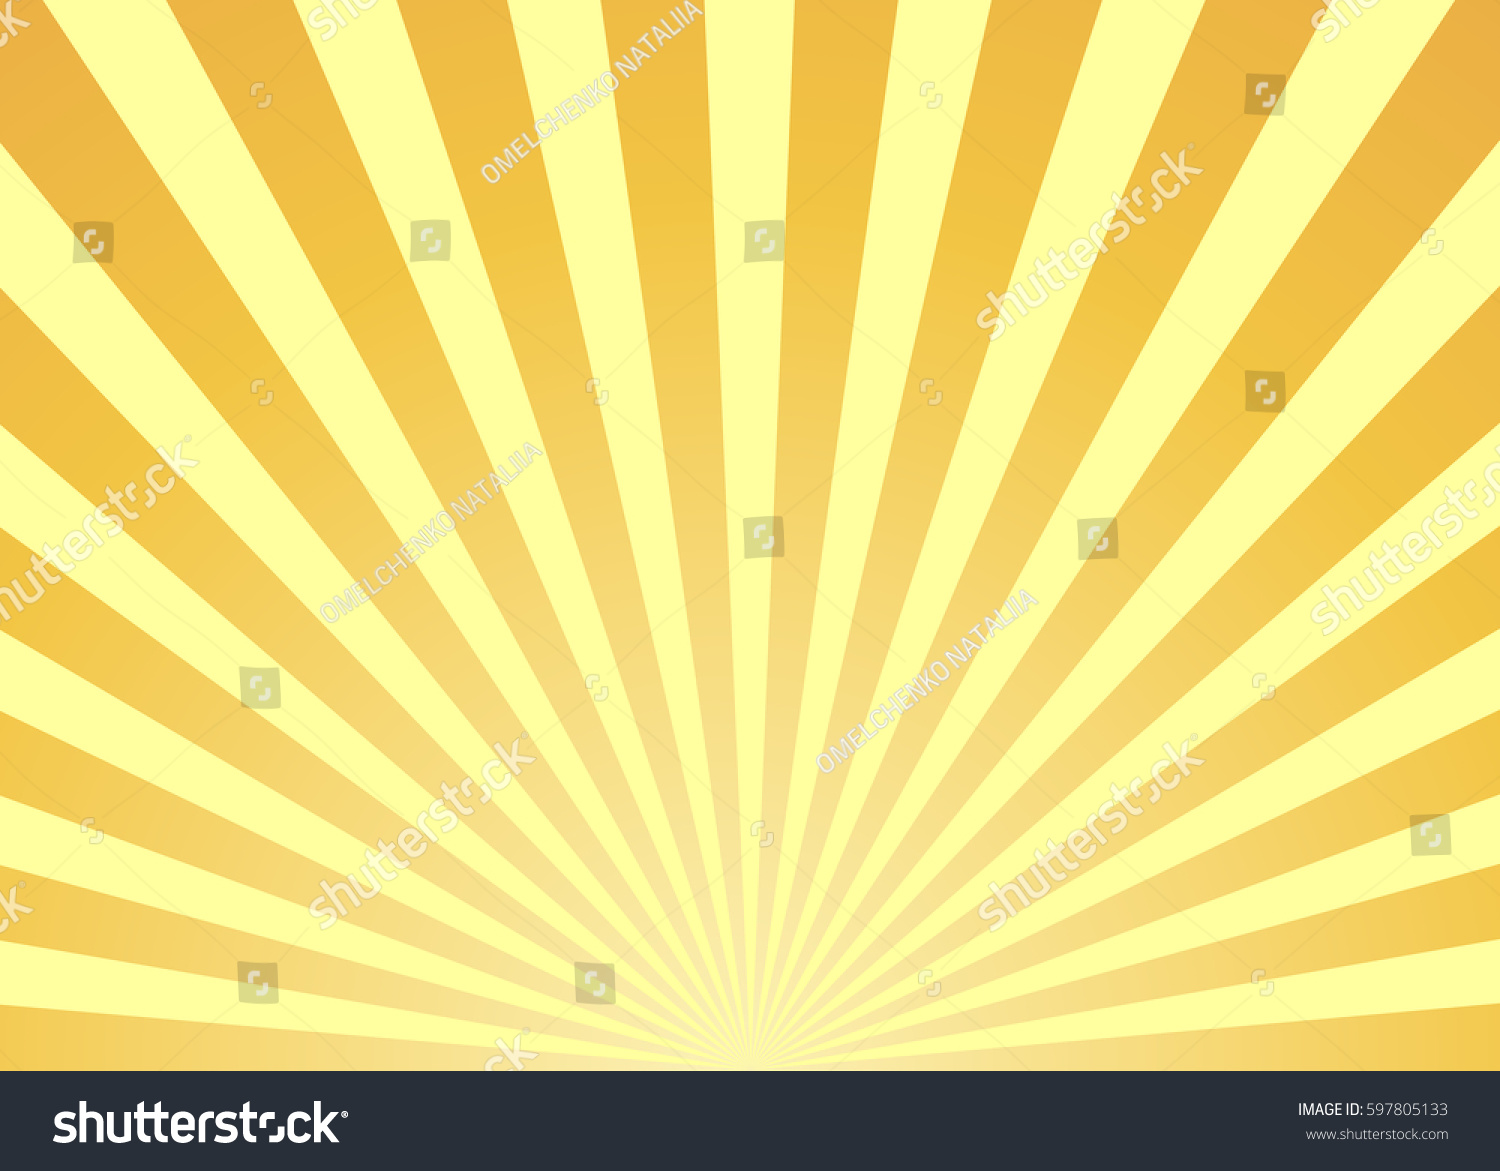 Abstract yellow sun rays background #597805133